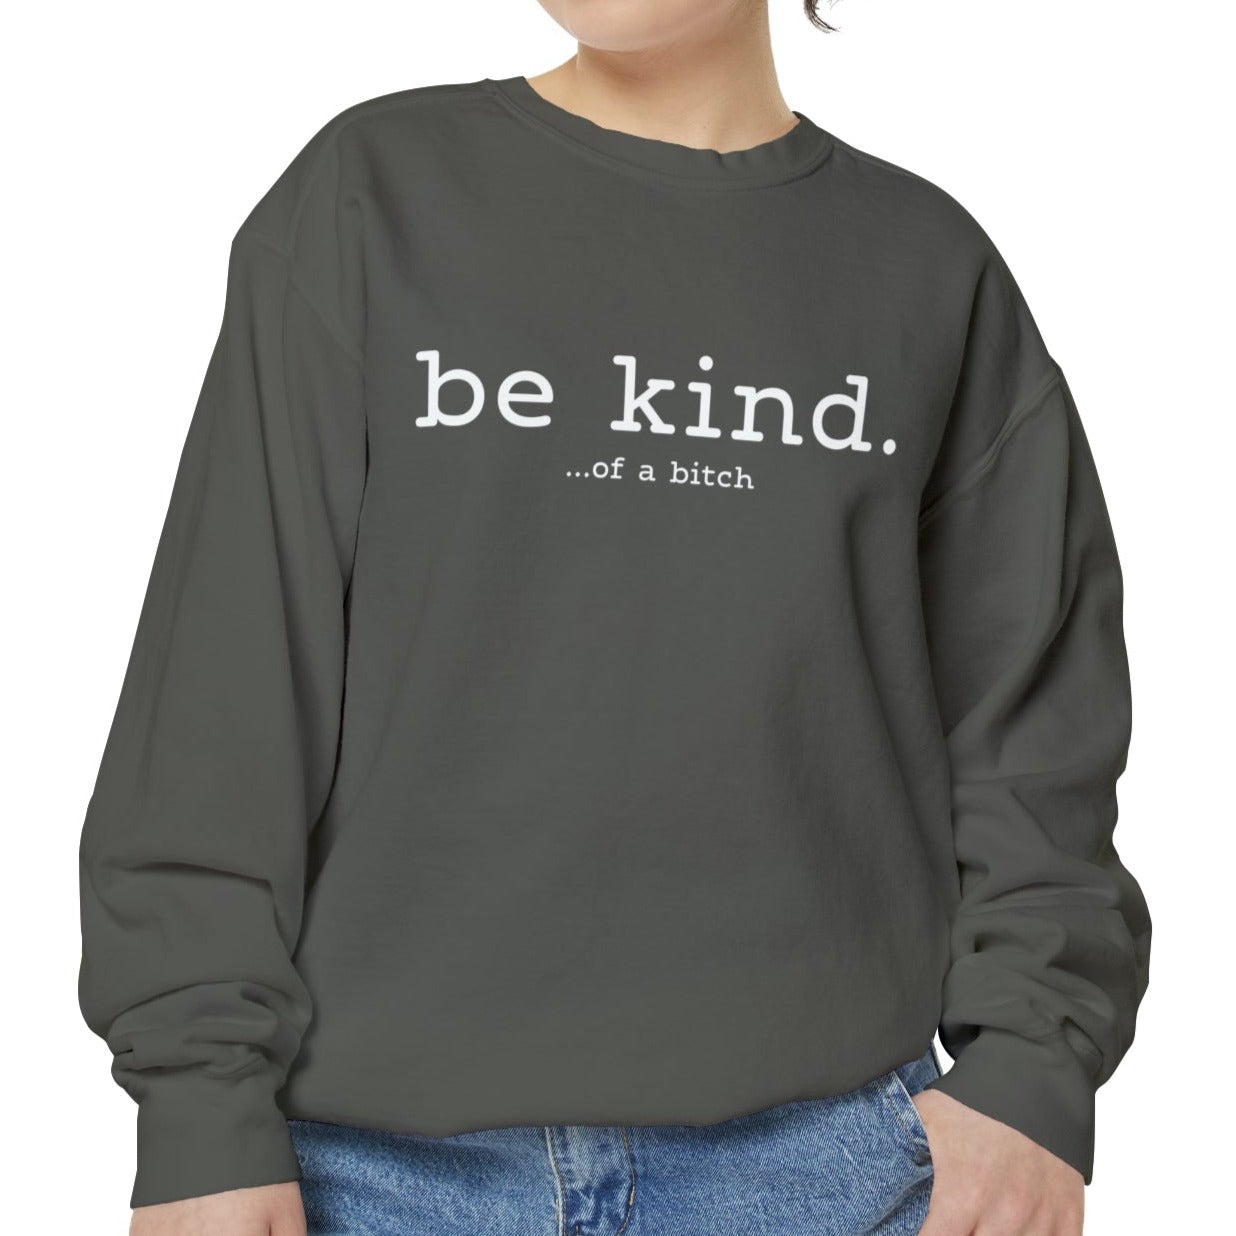 be kind. ...of a bitch